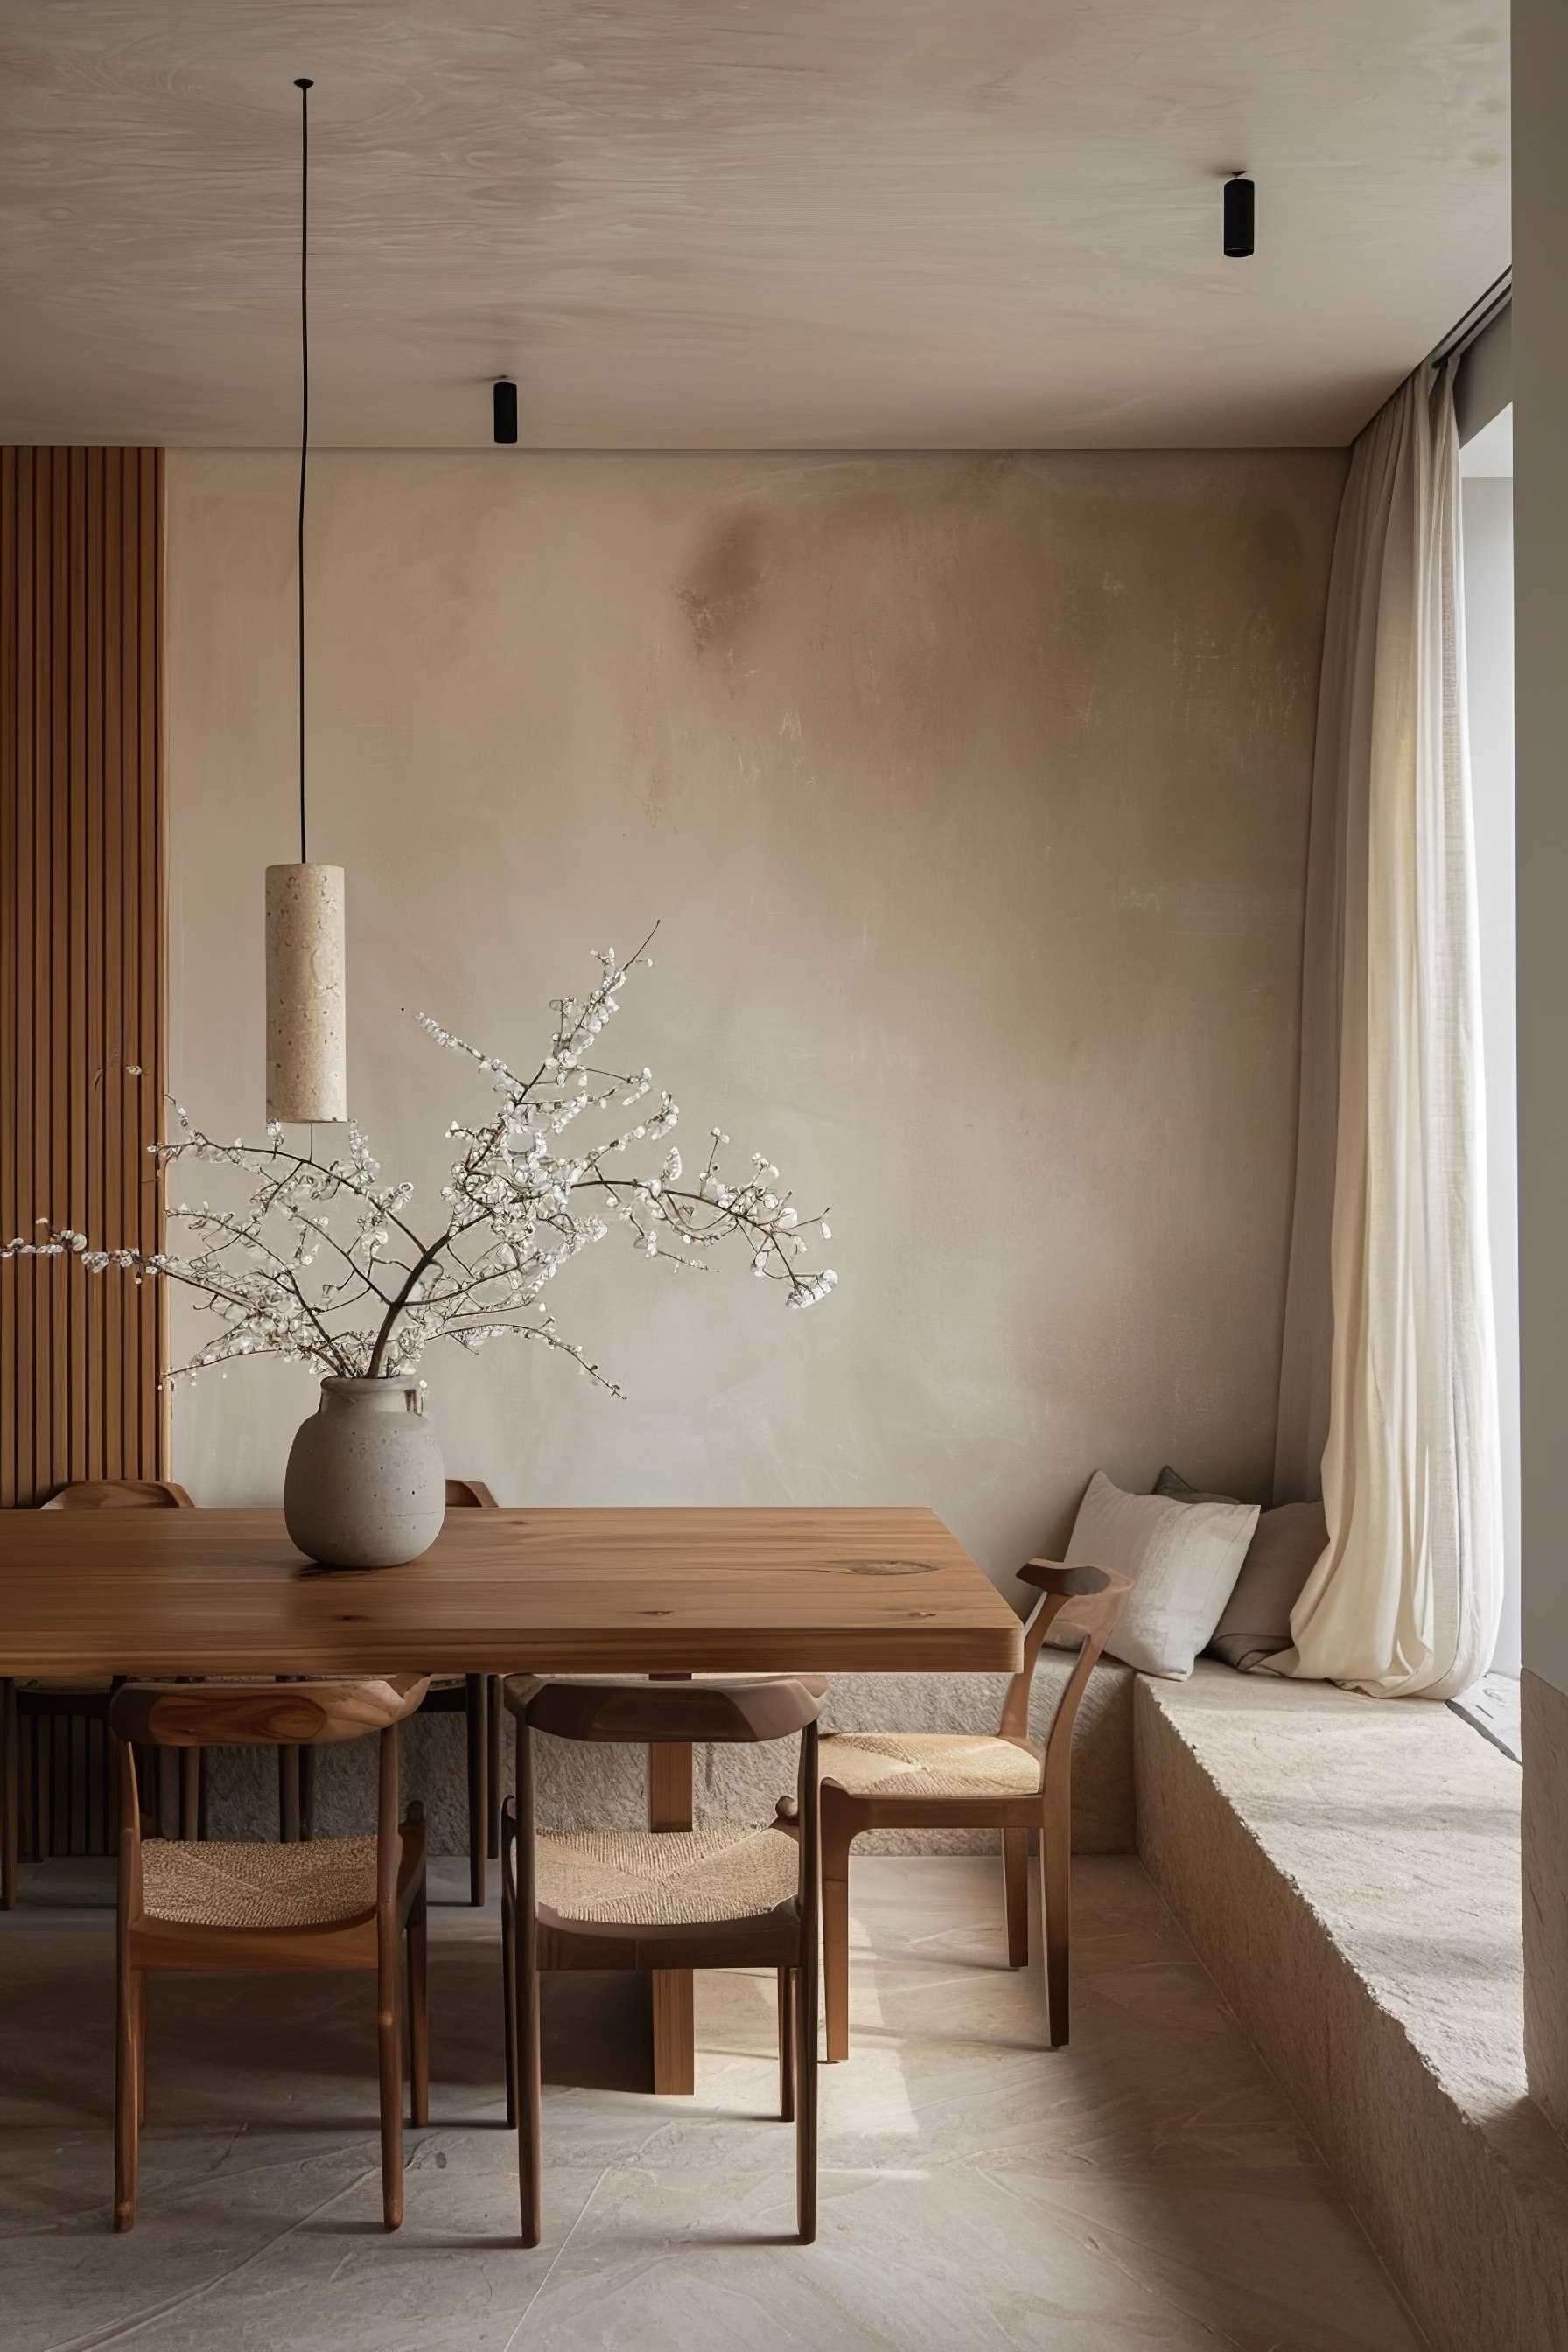 Modern minimalist dining room with wooden table and chairs, textured walls, and a vase with white blossoms.